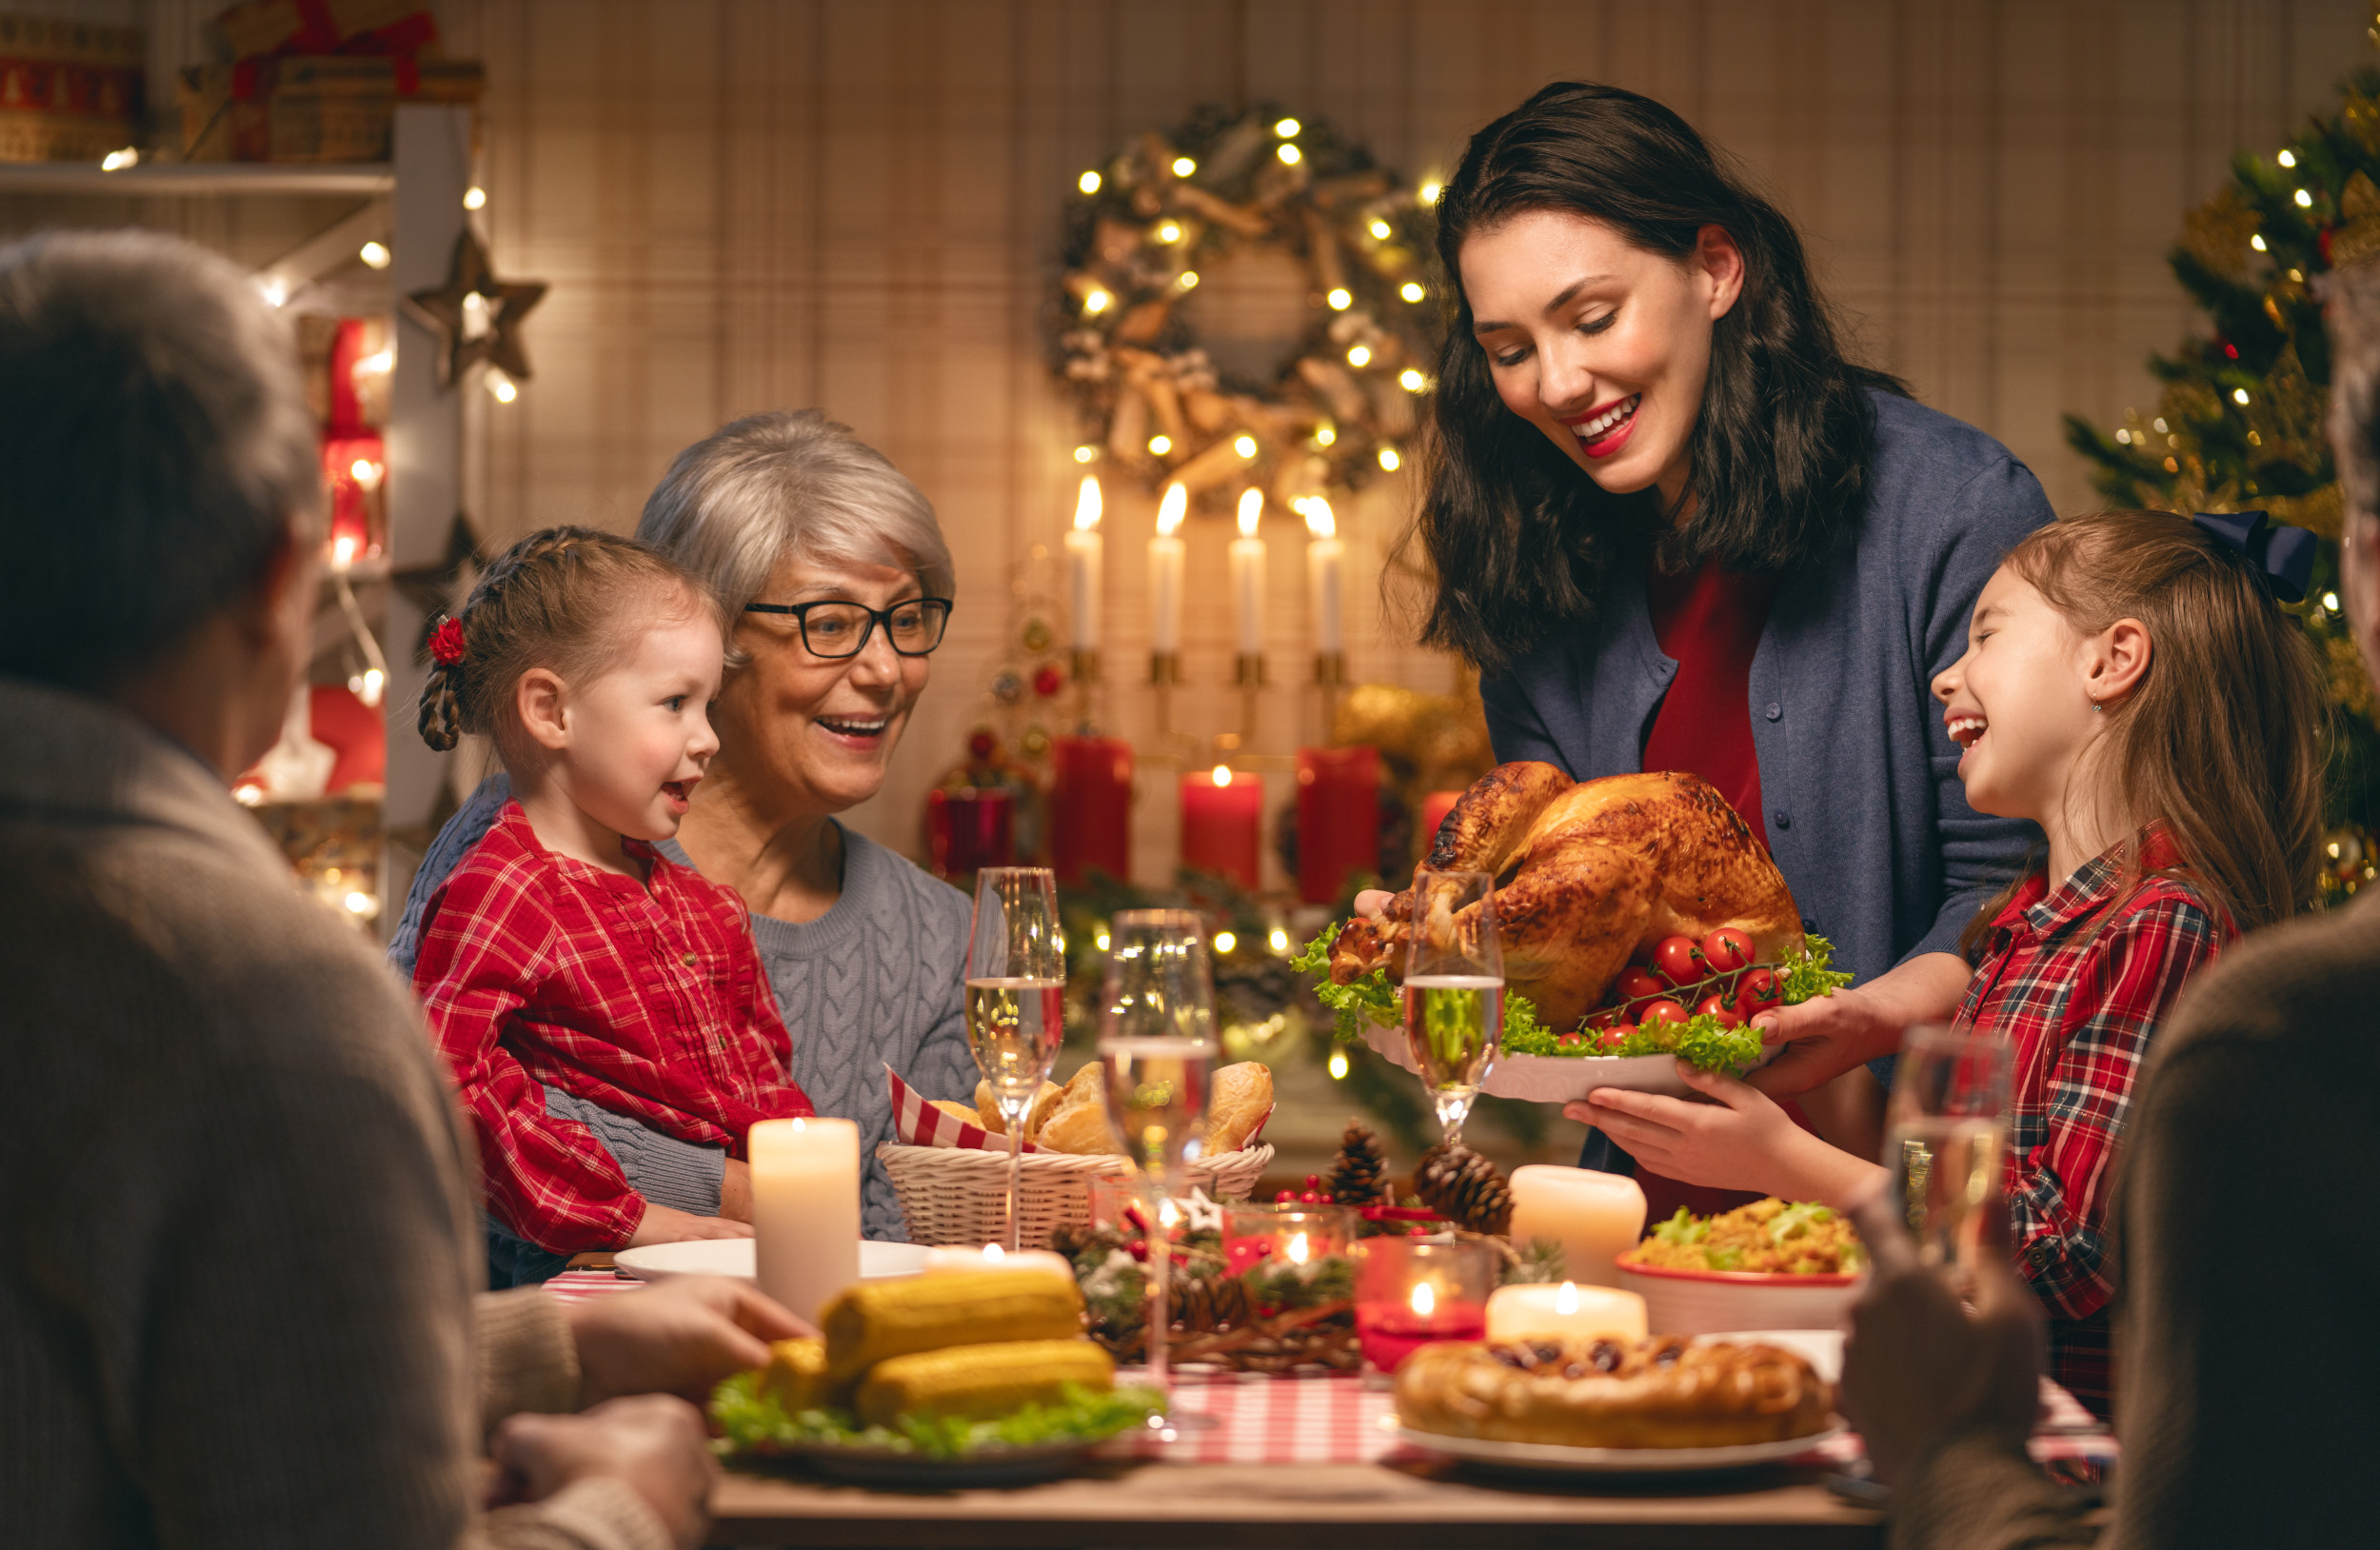 Why My Family Prefers Christmas Breakfast Over Lunch